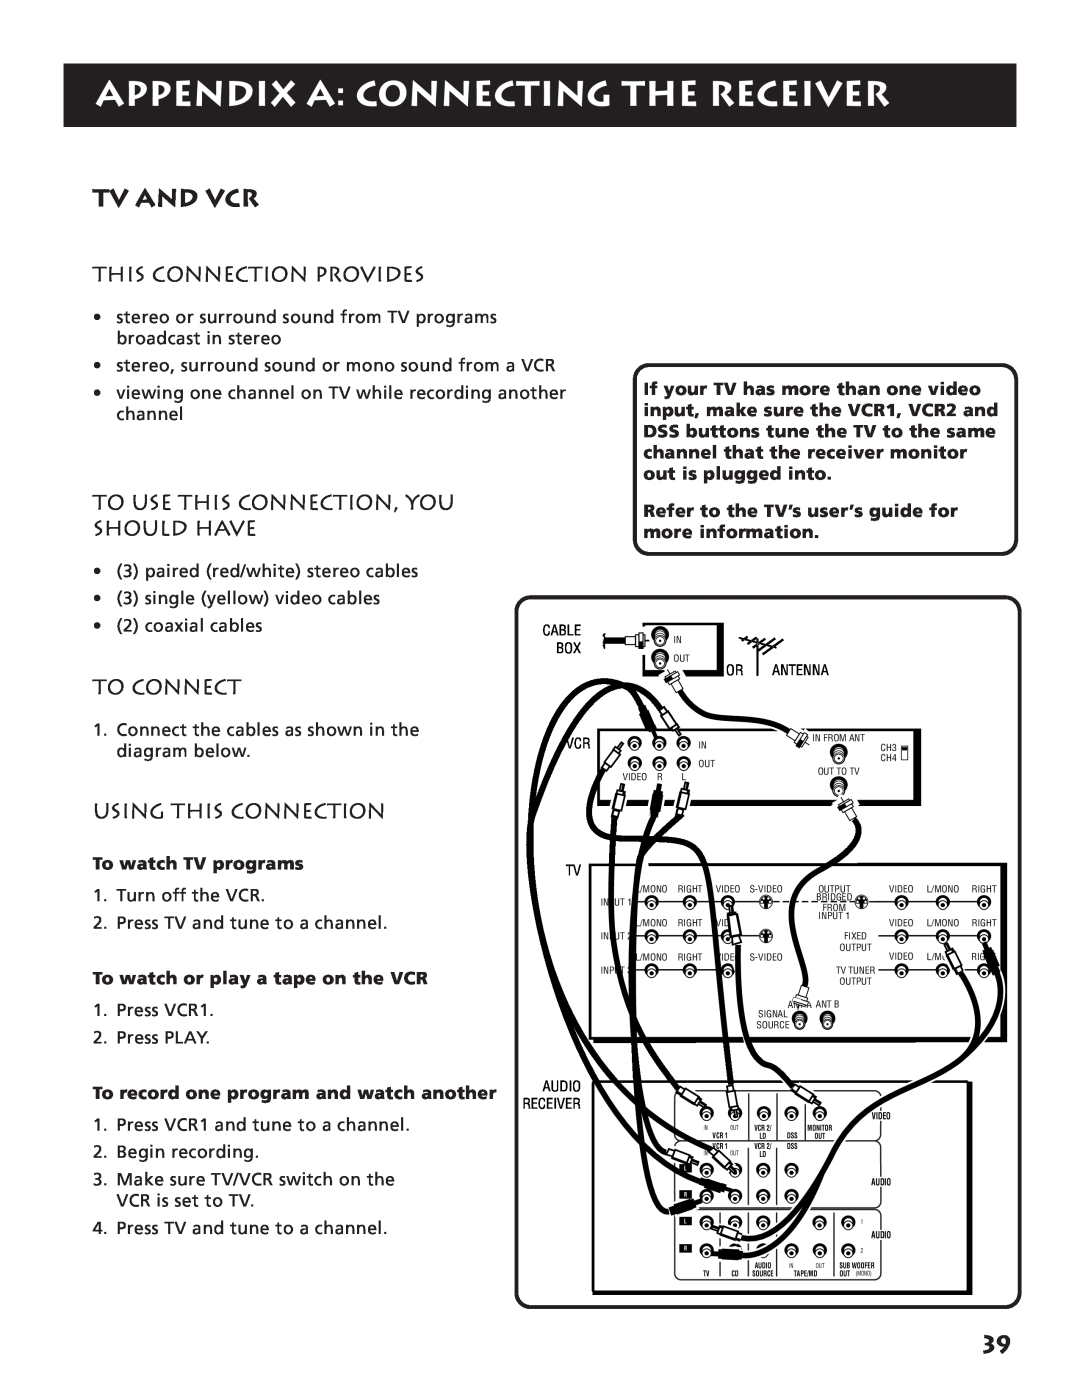 RCA RV3693 manual Tv And Vcr, Appendix A Connecting The Receiver, To watch TV programs, To watch or play a tape on the VCR 